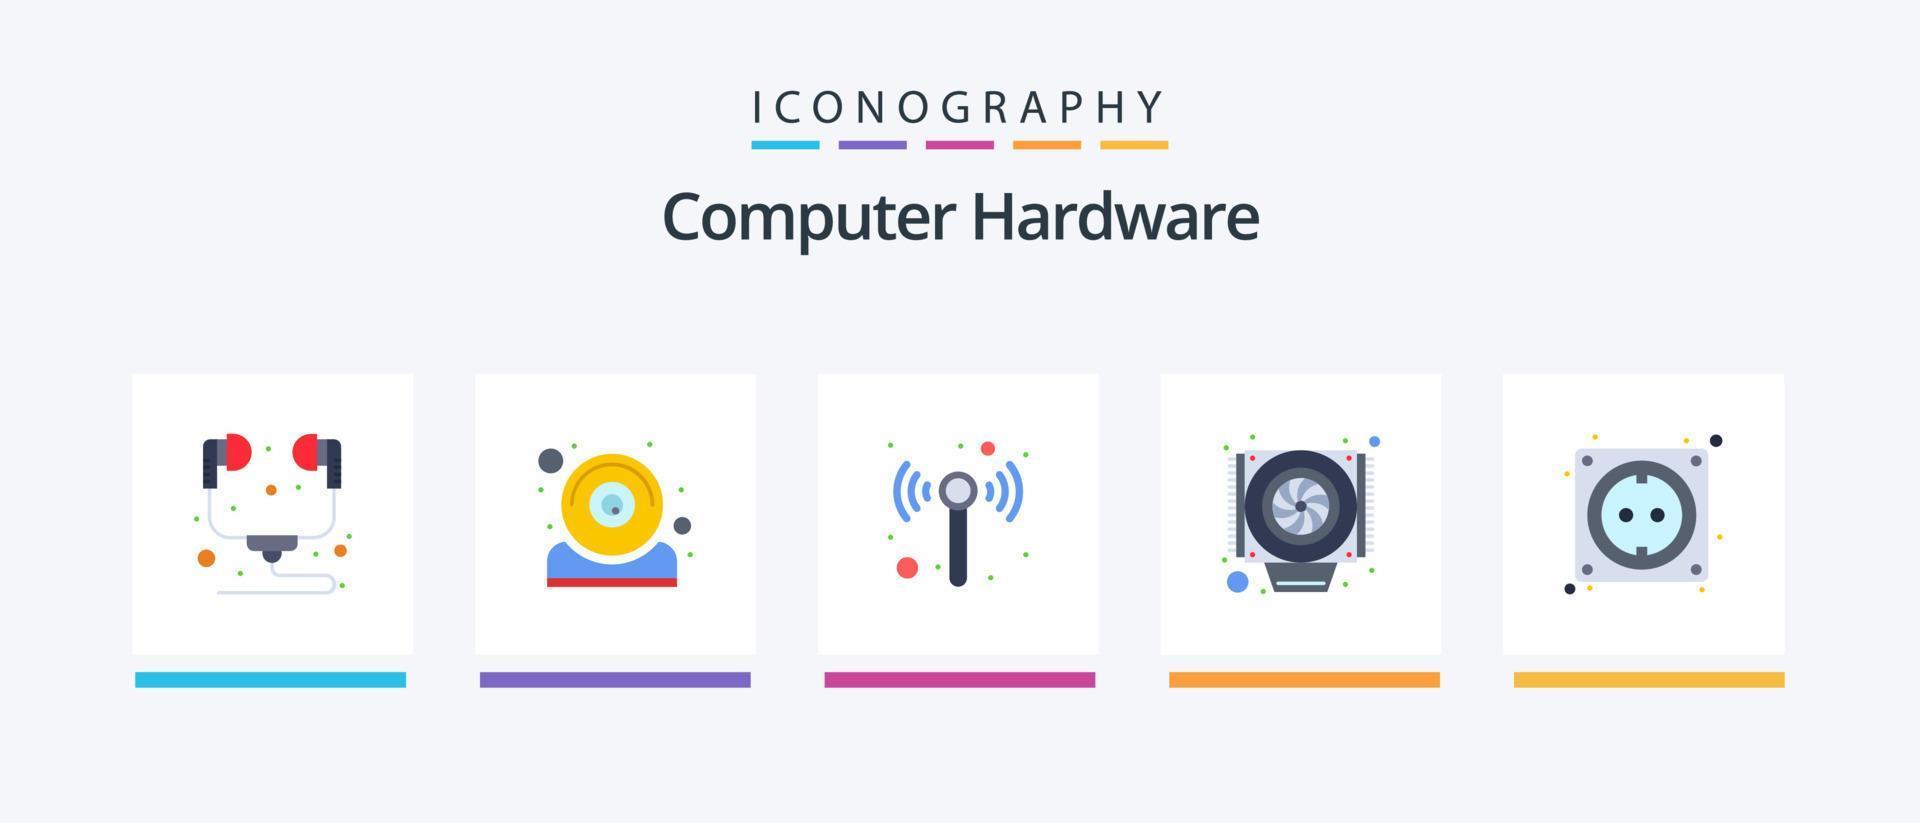 Computer Hardware Flat 5 Icon Pack Including stock. computer. technology. cable. cooler. Creative Icons Design vector